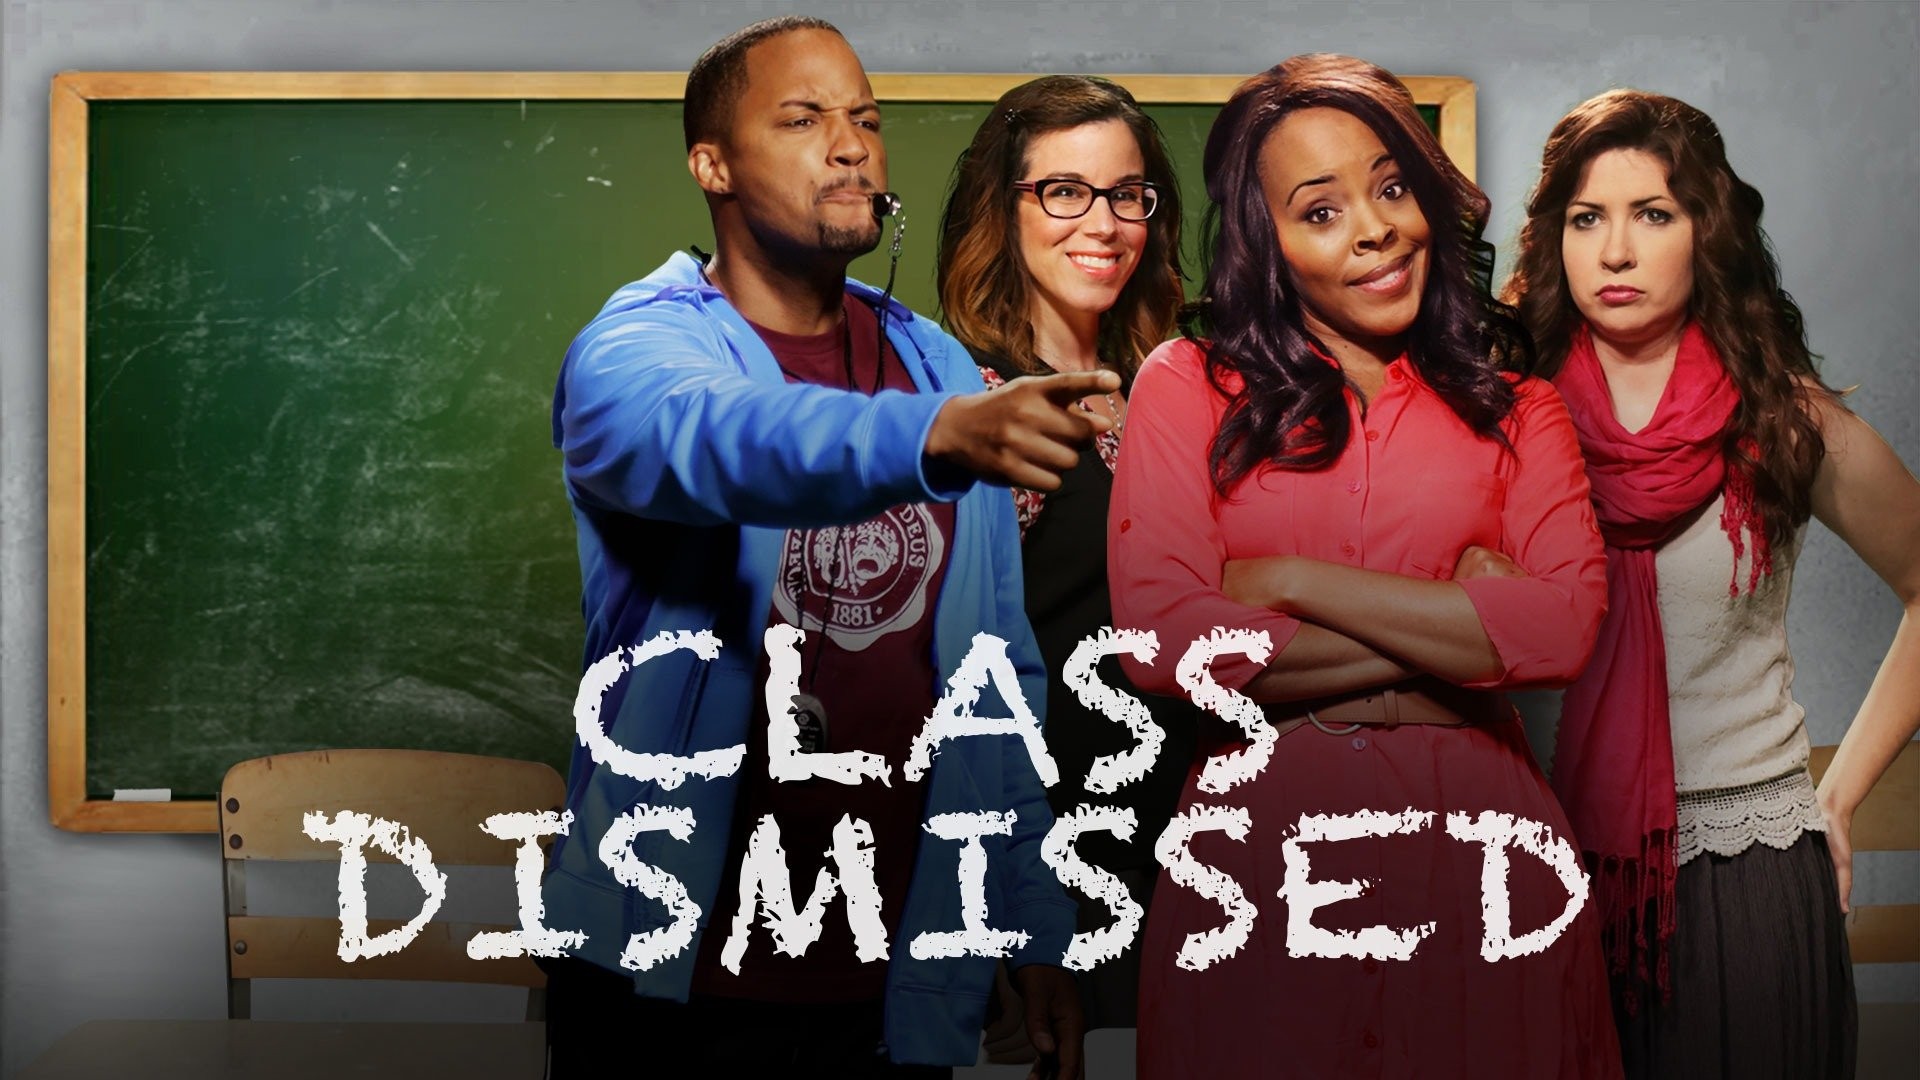 Class Dismissed: A Film About Learning Outside Of The Classroom (2015)